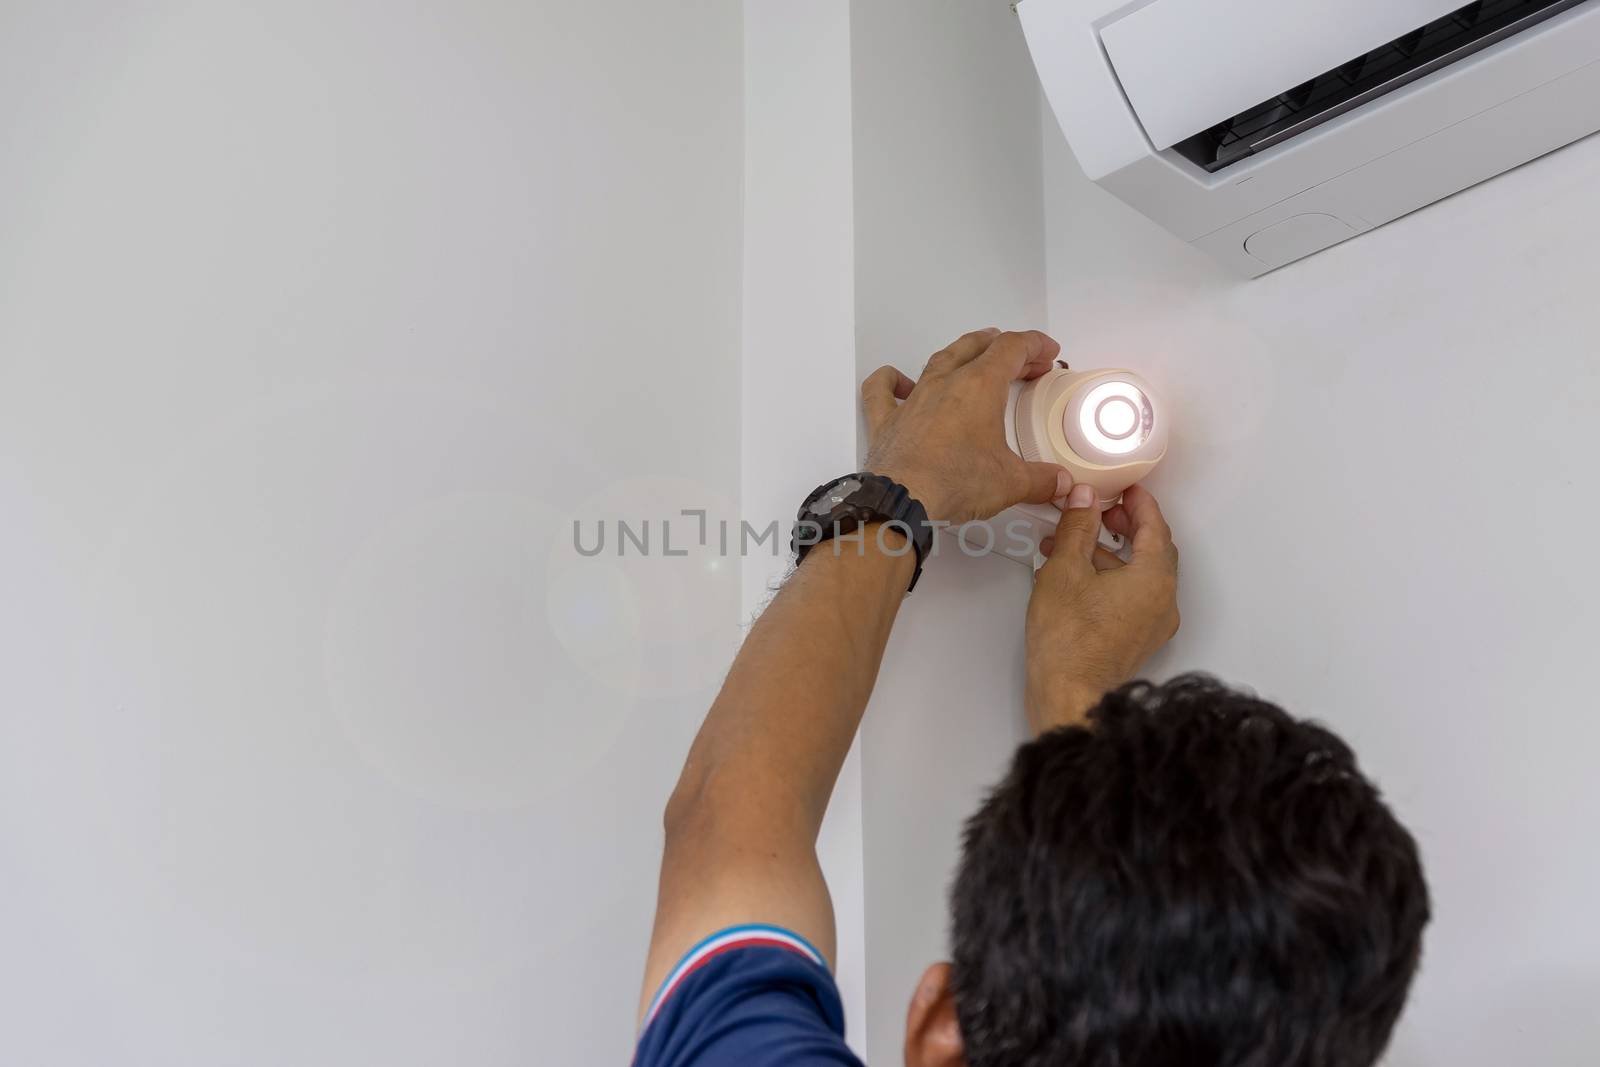 Technicians are installing a CCTV camera on the wall, can connect to the Internet, and control the camera via a smart phone or tablet.